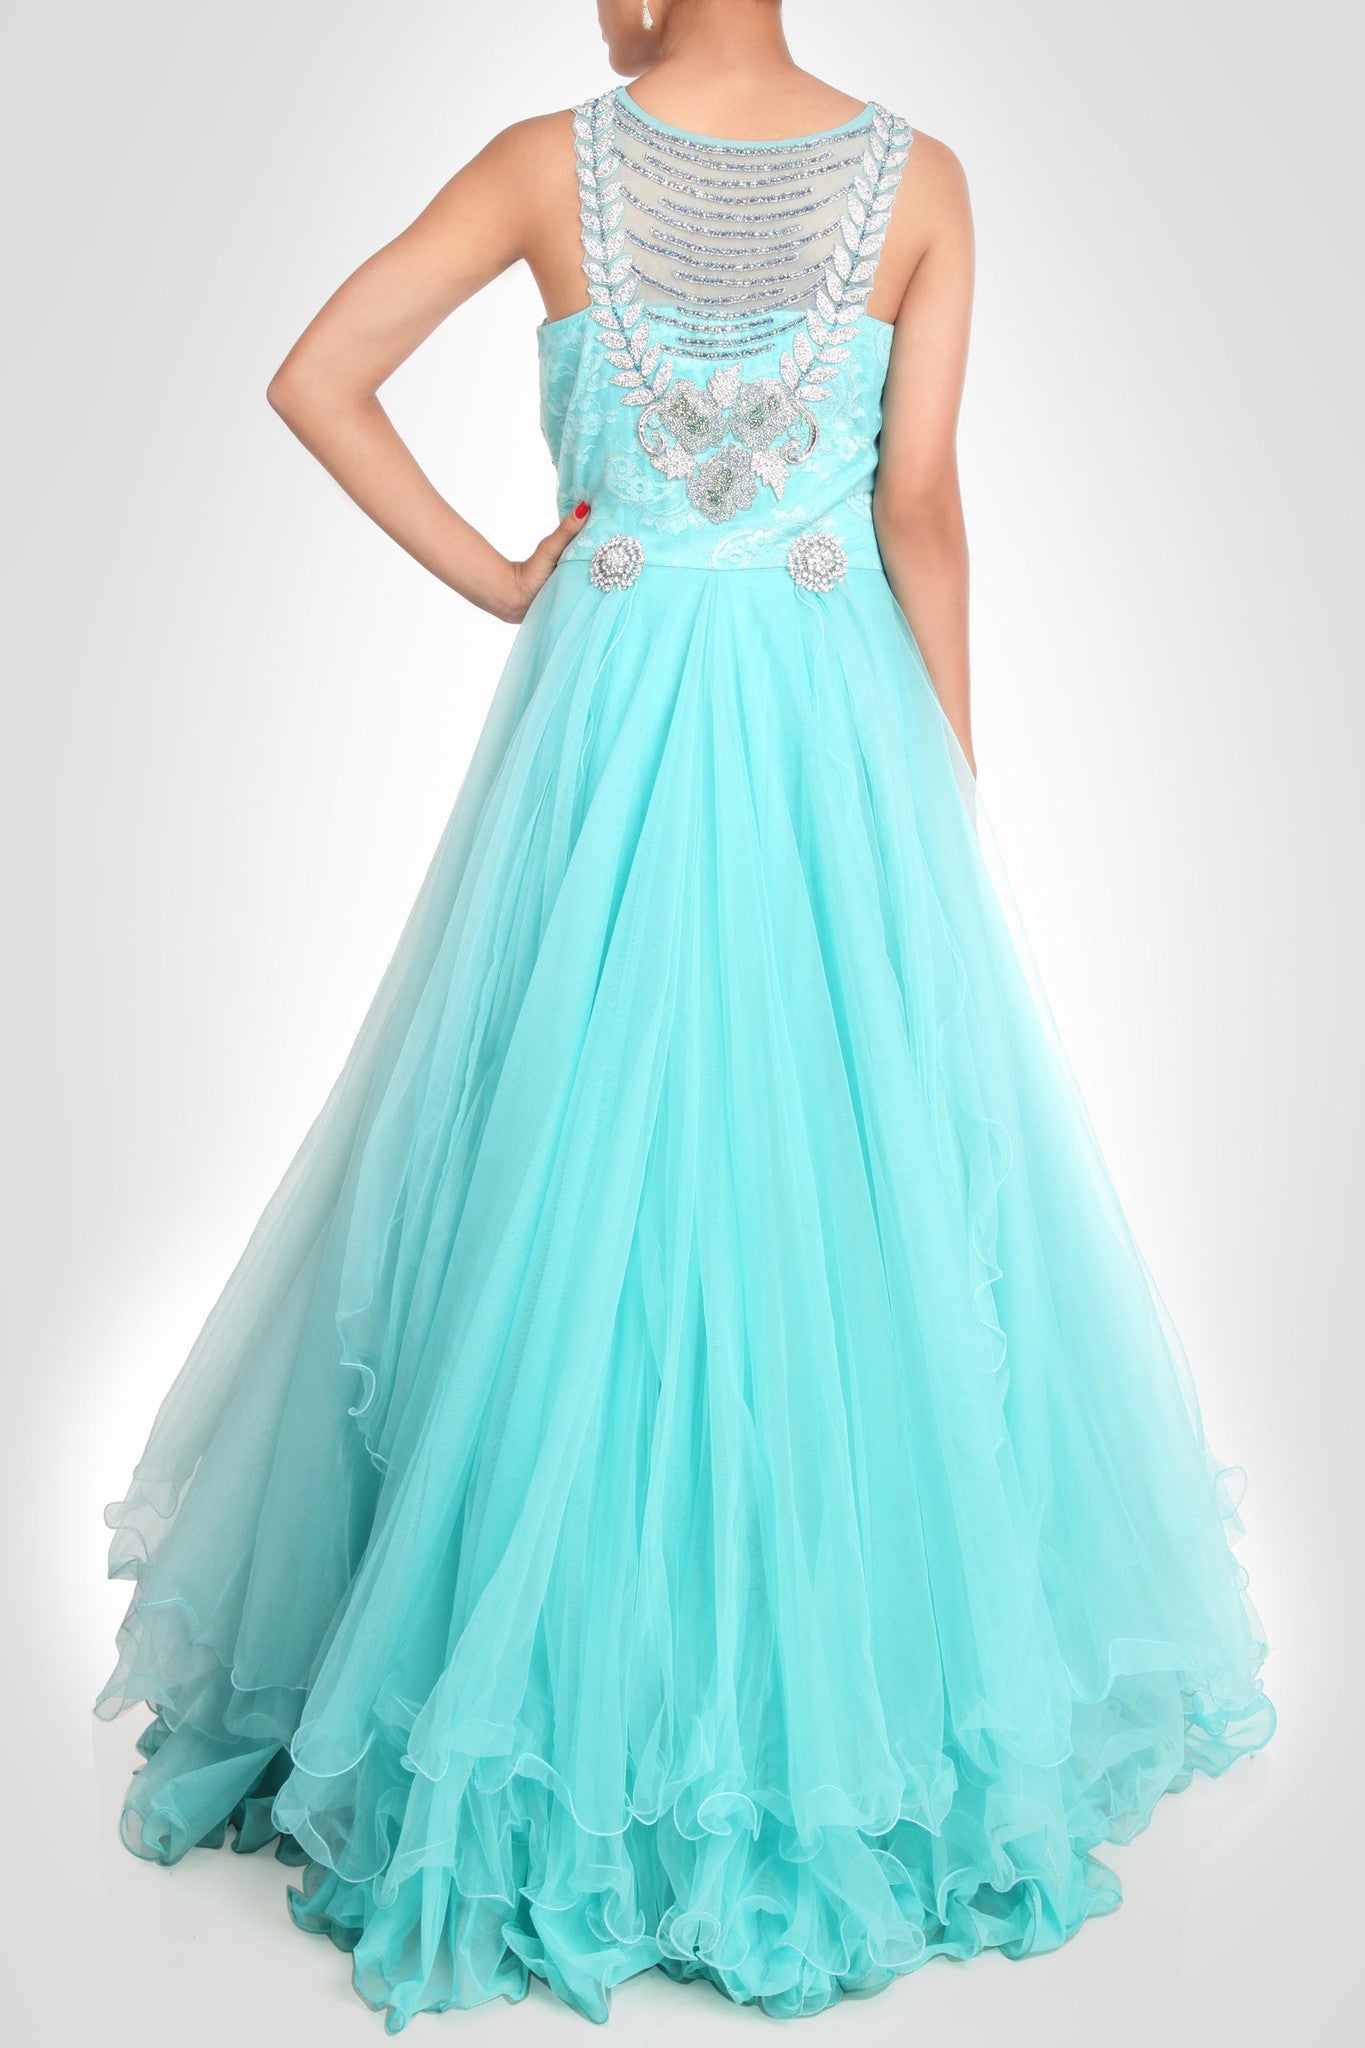 2021 Blue Ball Gown Prom Dress New Movie Princess Indonesia | Ubuy